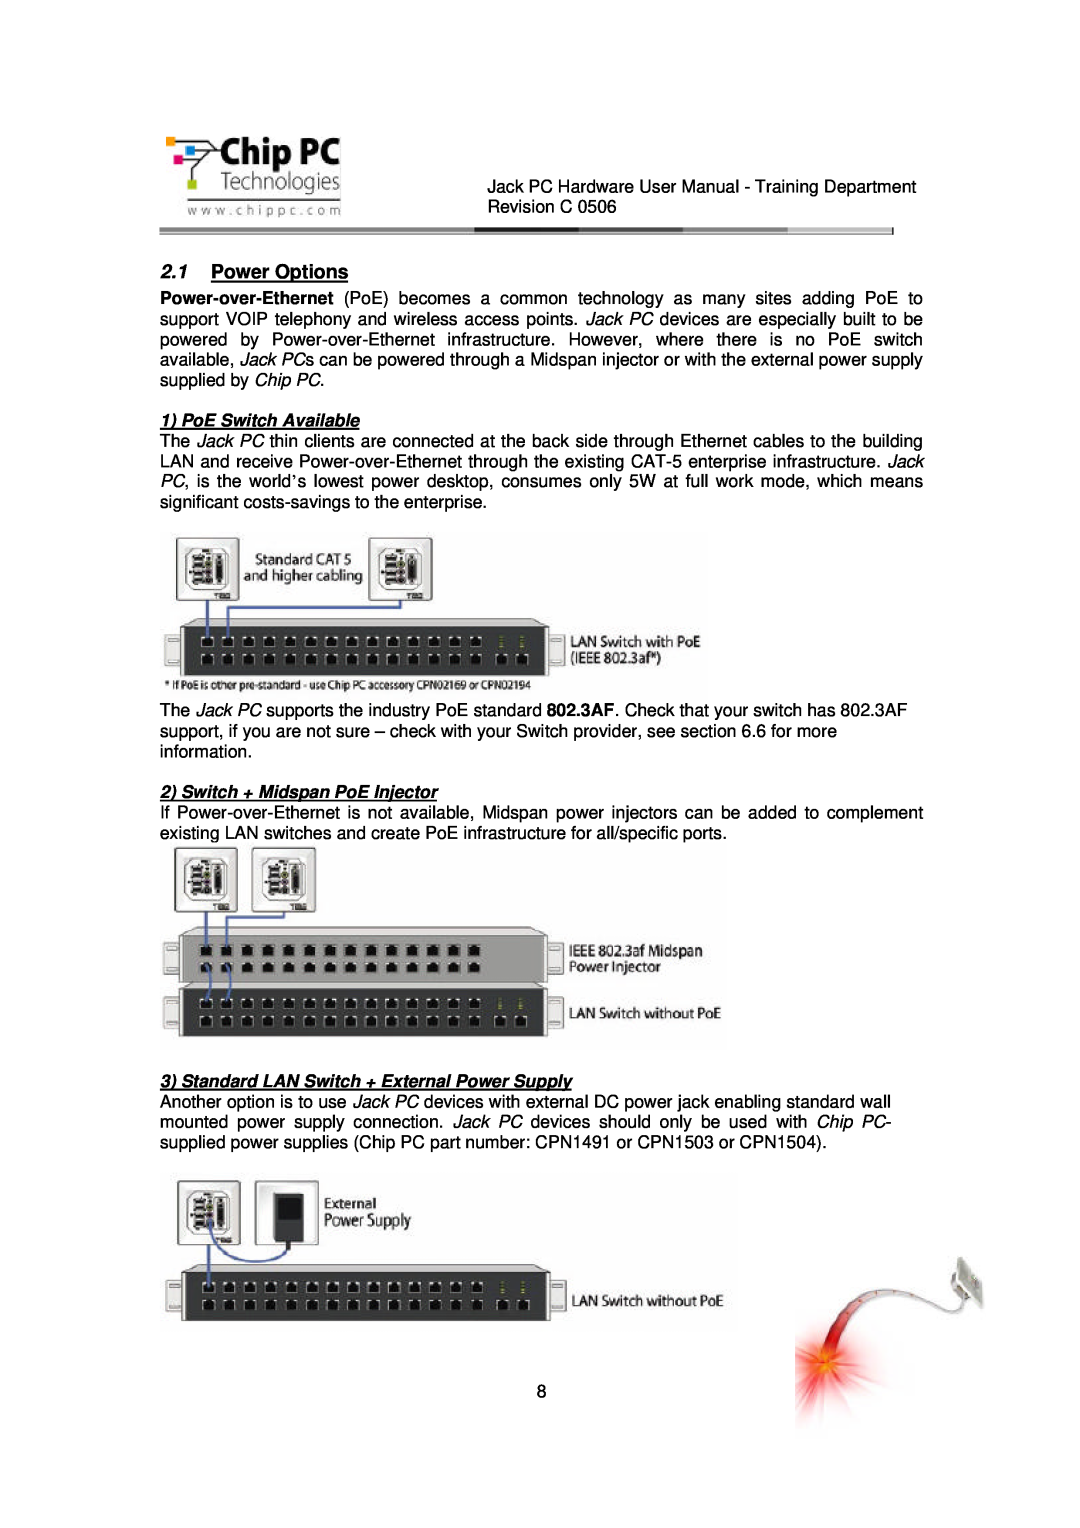 Chip PC CDC01927 manual Power Options, PoE Switch Available, Switch + Midspan PoE Injector 